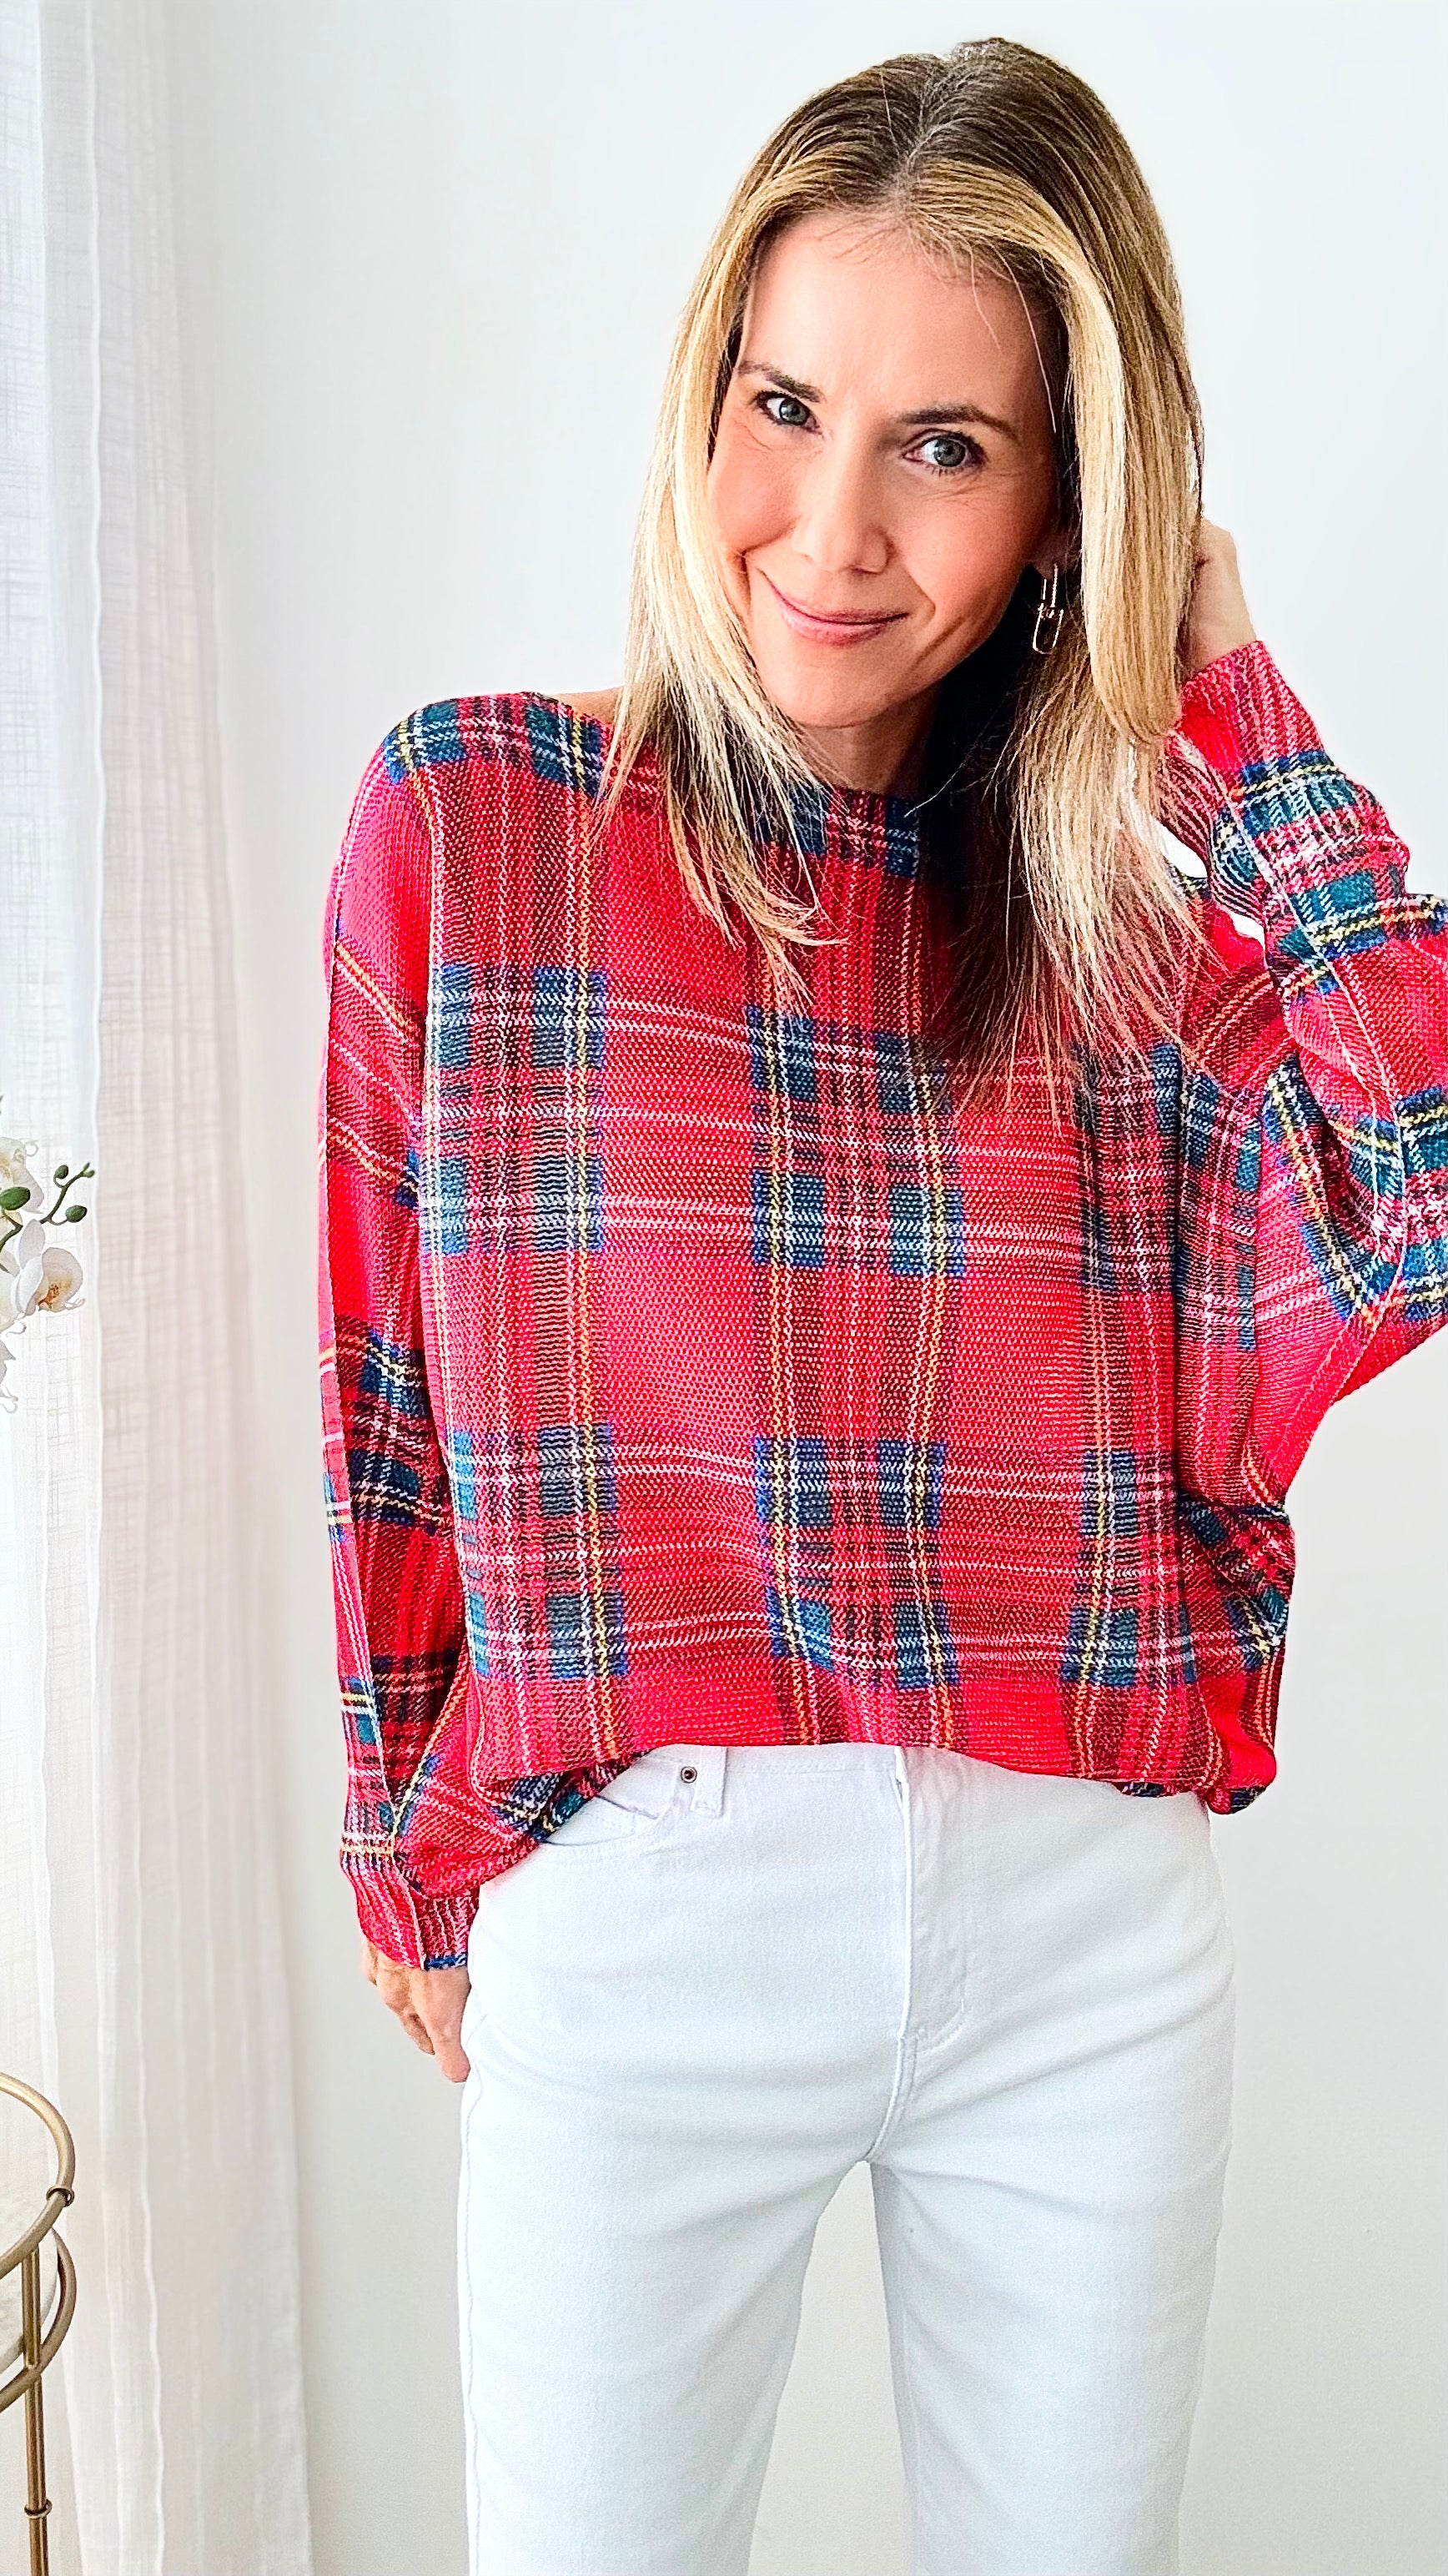 St Tropez Festive Plaid Italian Knit Sweater-140 Sweaters-Germany-Coastal Bloom Boutique, find the trendiest versions of the popular styles and looks Located in Indialantic, FL